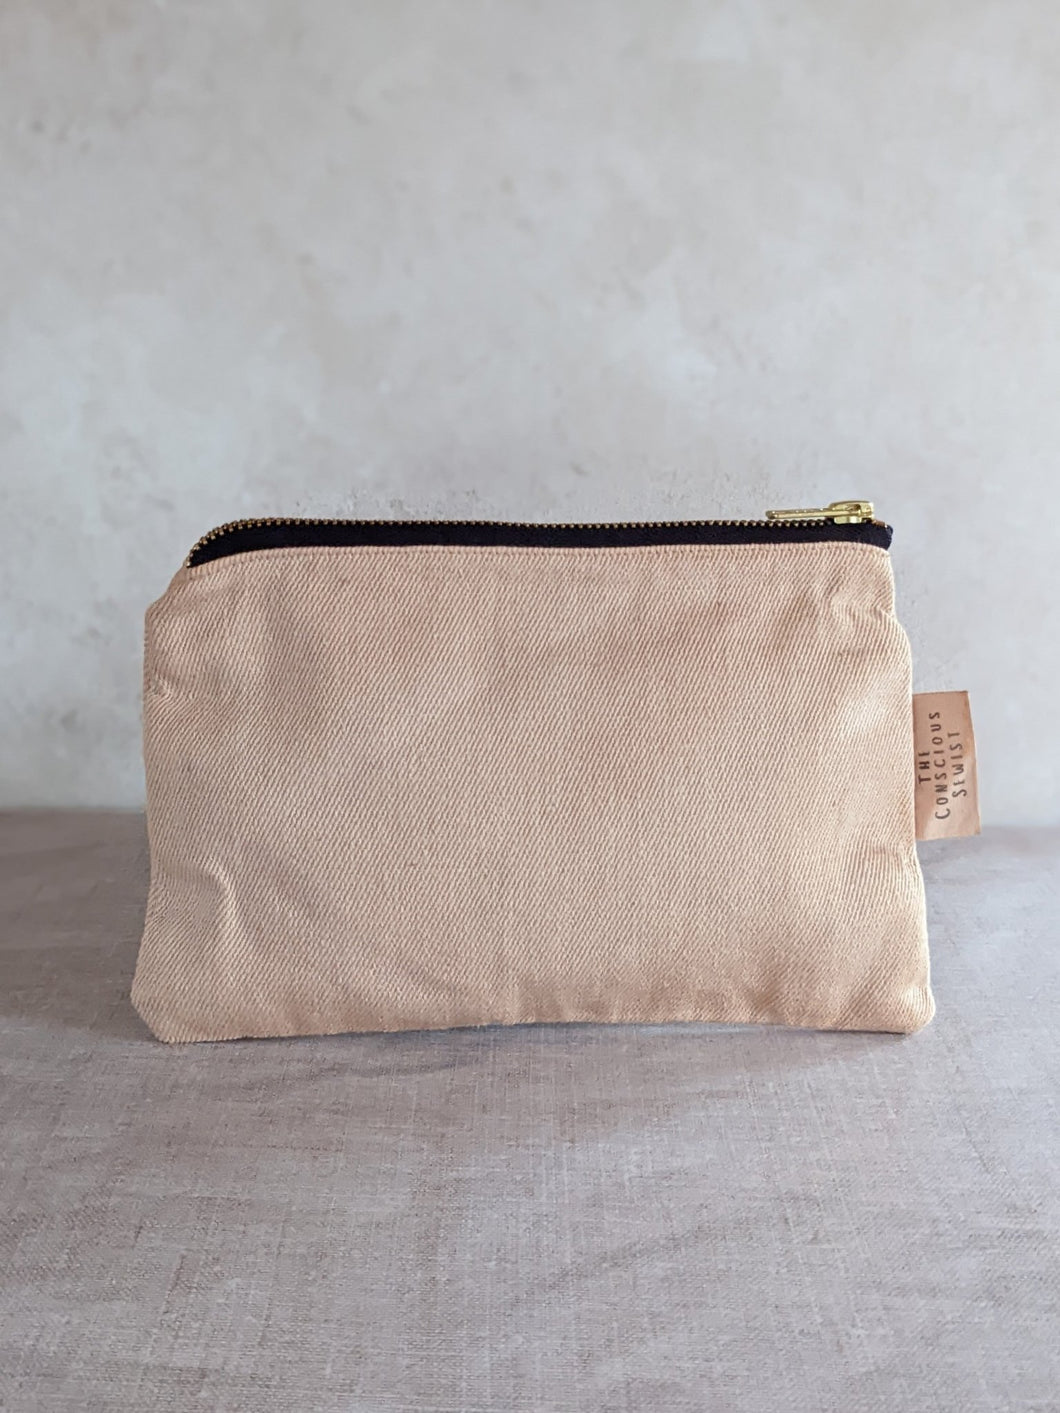 Avocado Dyed Zip Pouch - Accessories - The Conscious Sewist - accessories - Make-up bag